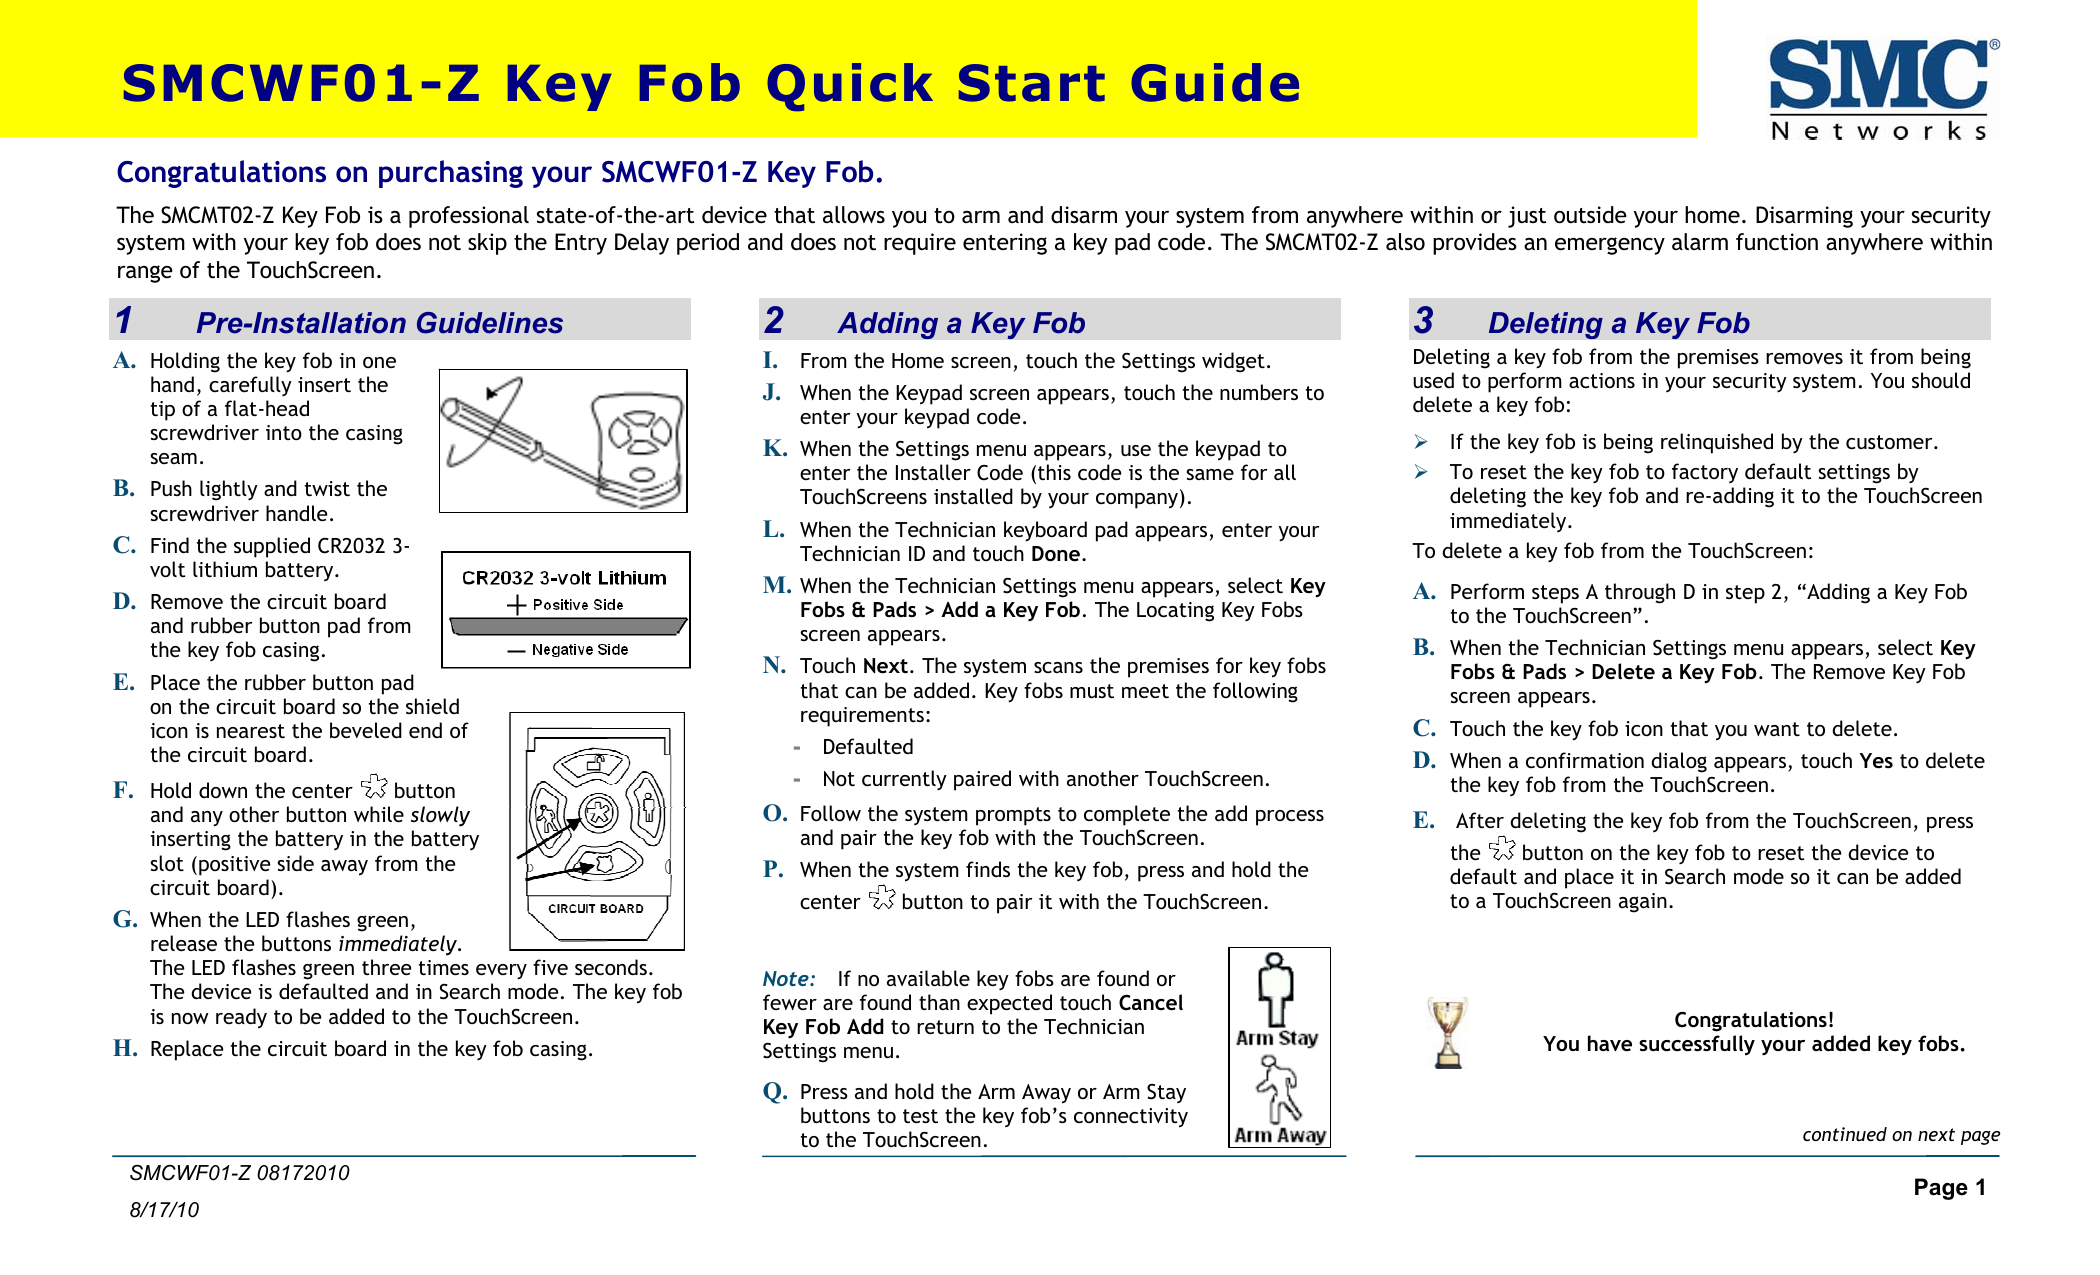  Page 1 8/17/10 SMCWF01-Z 08172010 SMCWF01-Z Key Fob Quick Start Guide 1     Pre-Installation Guidelines A. Holding the key fob in one hand, carefully insert the tip of a flat-head screwdriver into the casing seam. B. Push lightly and twist the screwdriver handle. C. Find the supplied CR2032 3-volt lithium battery. D. Remove the circuit board and rubber button pad from the key fob casing. E. Place the rubber button pad on the circuit board so the shield icon is nearest the beveled end of the circuit board. F. Hold down the center   button and any other button while slowly inserting the battery in the battery slot (positive side away from the circuit board).  G. When the LED flashes green, release the buttons immediately. The LED flashes green three times every five seconds. The device is defaulted and in Search mode. The key fob is now ready to be added to the TouchScreen. H. Replace the circuit board in the key fob casing.  2I    Adding a Key Fob . From the Home screen, touch the Settings widget. J. When the Keypad screen appears, touch the numbers enter your keypad code. to K. When the Settings menu appears, use the keypad to enter the Installer Code (this code is the same for all TouchScreens installed by your company). When the Technician keyboard pad appears, enter your Technician ID anL. d touch Done. M. When the Technician Settings menu appears, select Key Fobs &amp; Pads &gt; Add a Key Fob. The Locating Key Fobs screen appears. N. Touch Next  . The system scans the premises for keythat can be added. Key fobs must meet the followin fobs g requirements: -  Defaulted -  Not currently paired with another TouchScreen. Follow the system prompts to complete the add process O. and pair the key fob with the TouchScreen. P. When the system finds the key fob, press center and hold the  button to pair it with the TouchScreen. KeyQ. Press and hold the Arm Away or Arm Stay buttons to test the key fob’s connectivity to the TouchScreen. Note: If no available key fobs are found or fewer are found than expected touch Cancel  Fob Add to return to the Technician Settings menu.  3    Deleting a Key Fob Congratulations on purchasing your SMCWF01-Z Key Fob. The SMCMT02-Z Key Fob is a professional state-of-the-art device that allows you to arm and disarm your system from anywhere within or just outside your home. Disarming your security system with your key fob does not skip the Entry Delay period and does not require entering a key pad code. The SMCMT02-Z also provides an emergency alarm function anywhere within range of the TouchScreen. Deleting a key fob from the premises removes it from being used to perform actions in your security system. You should delete a key fob: ¾ If the key fob is being relinquished by the customer. ¾ To reset the key fob to factory default settings by deleting the key fob and re-adding it to the TouchScreen immediately. To delete a key fob from the TouchScreen:  A. Perform steps A through D in step 2, “Adding a Key Fob to the TouchScreen”. B. When the Technician Settings menu appears, select Key Fobs &amp; Pads &gt; Delete a Key Fob. The Remove Key Fob screen appears. C. Touch the key fob icon that you want to delete.  D. When a confirmation dialog appears, touch Yes to delete the key fob from the TouchScreen. E.  After deleting the key fob from the TouchScreen, press the   button on the key fob to reset the device to default and place it in Search mode so it can be added to a TouchScreen again.    Congratulations! You have successfully your added key fobs. continued on next page